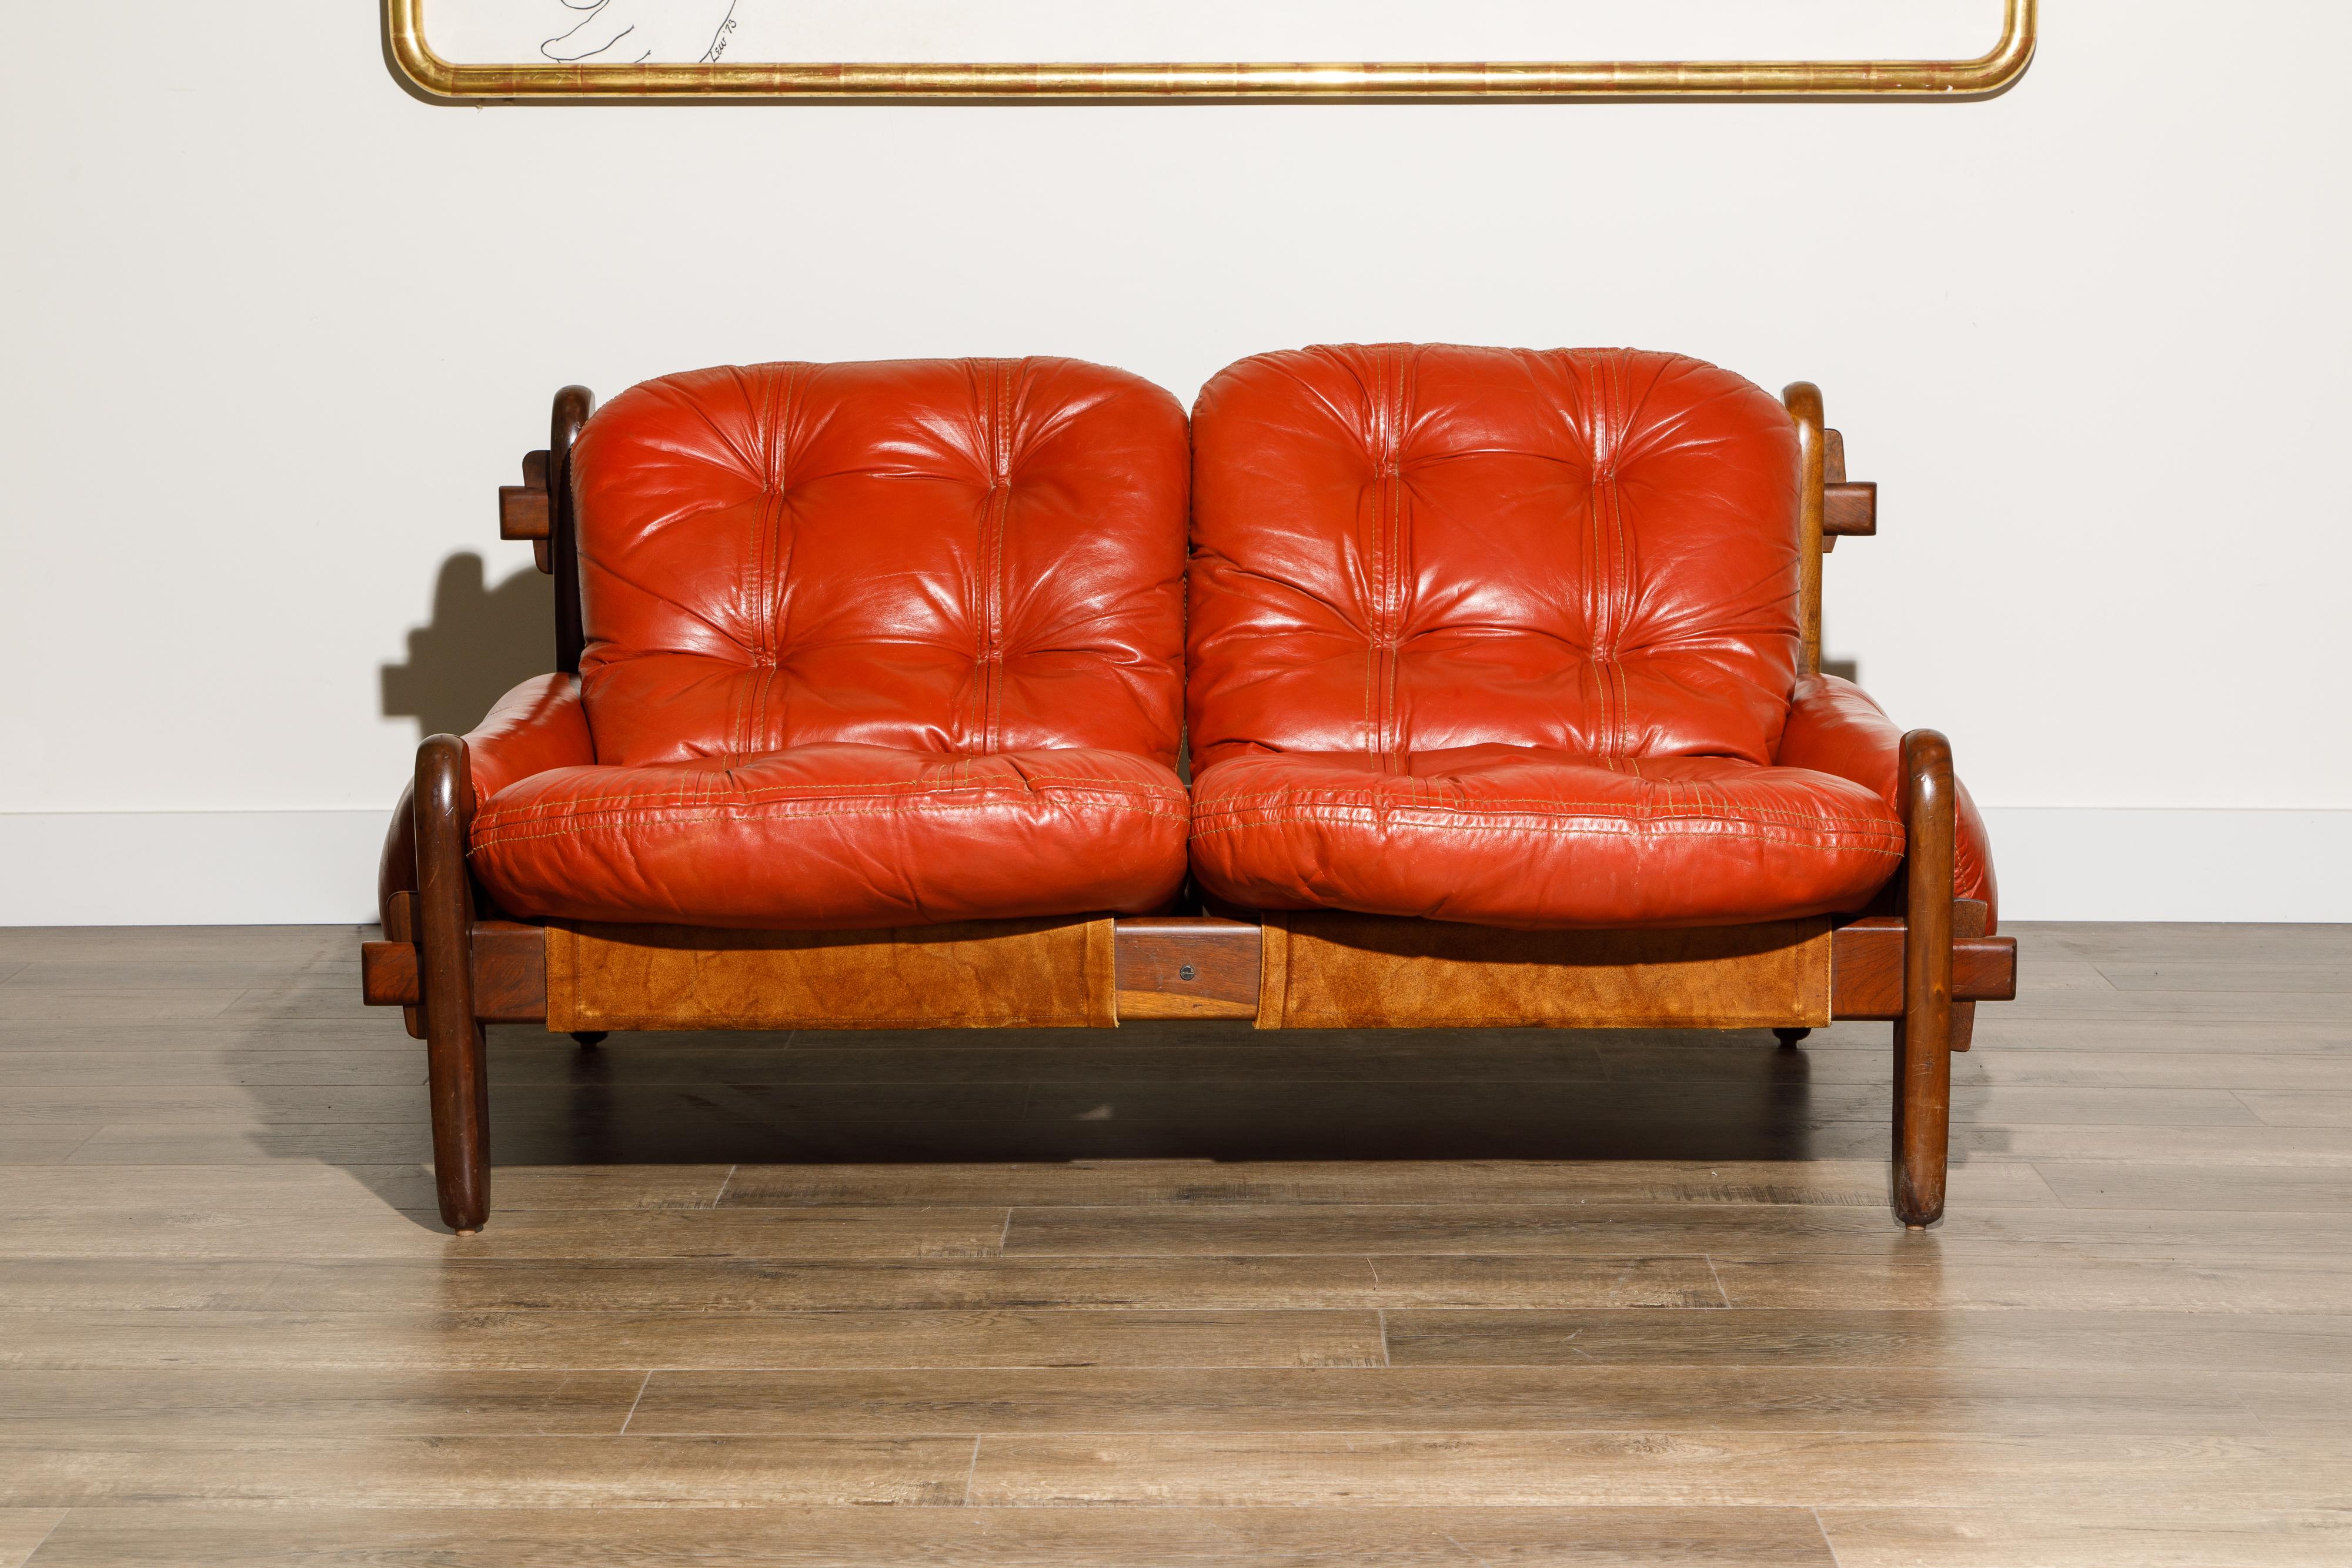 This rare Brazilian Modern collectors piece is by Jean Gillon for Probel and features gorgeous Brazilian Rosewood Jacaranda and beautiful red leather seats and arms.  Featuring natural leather slings which support the tufted seat cushions and